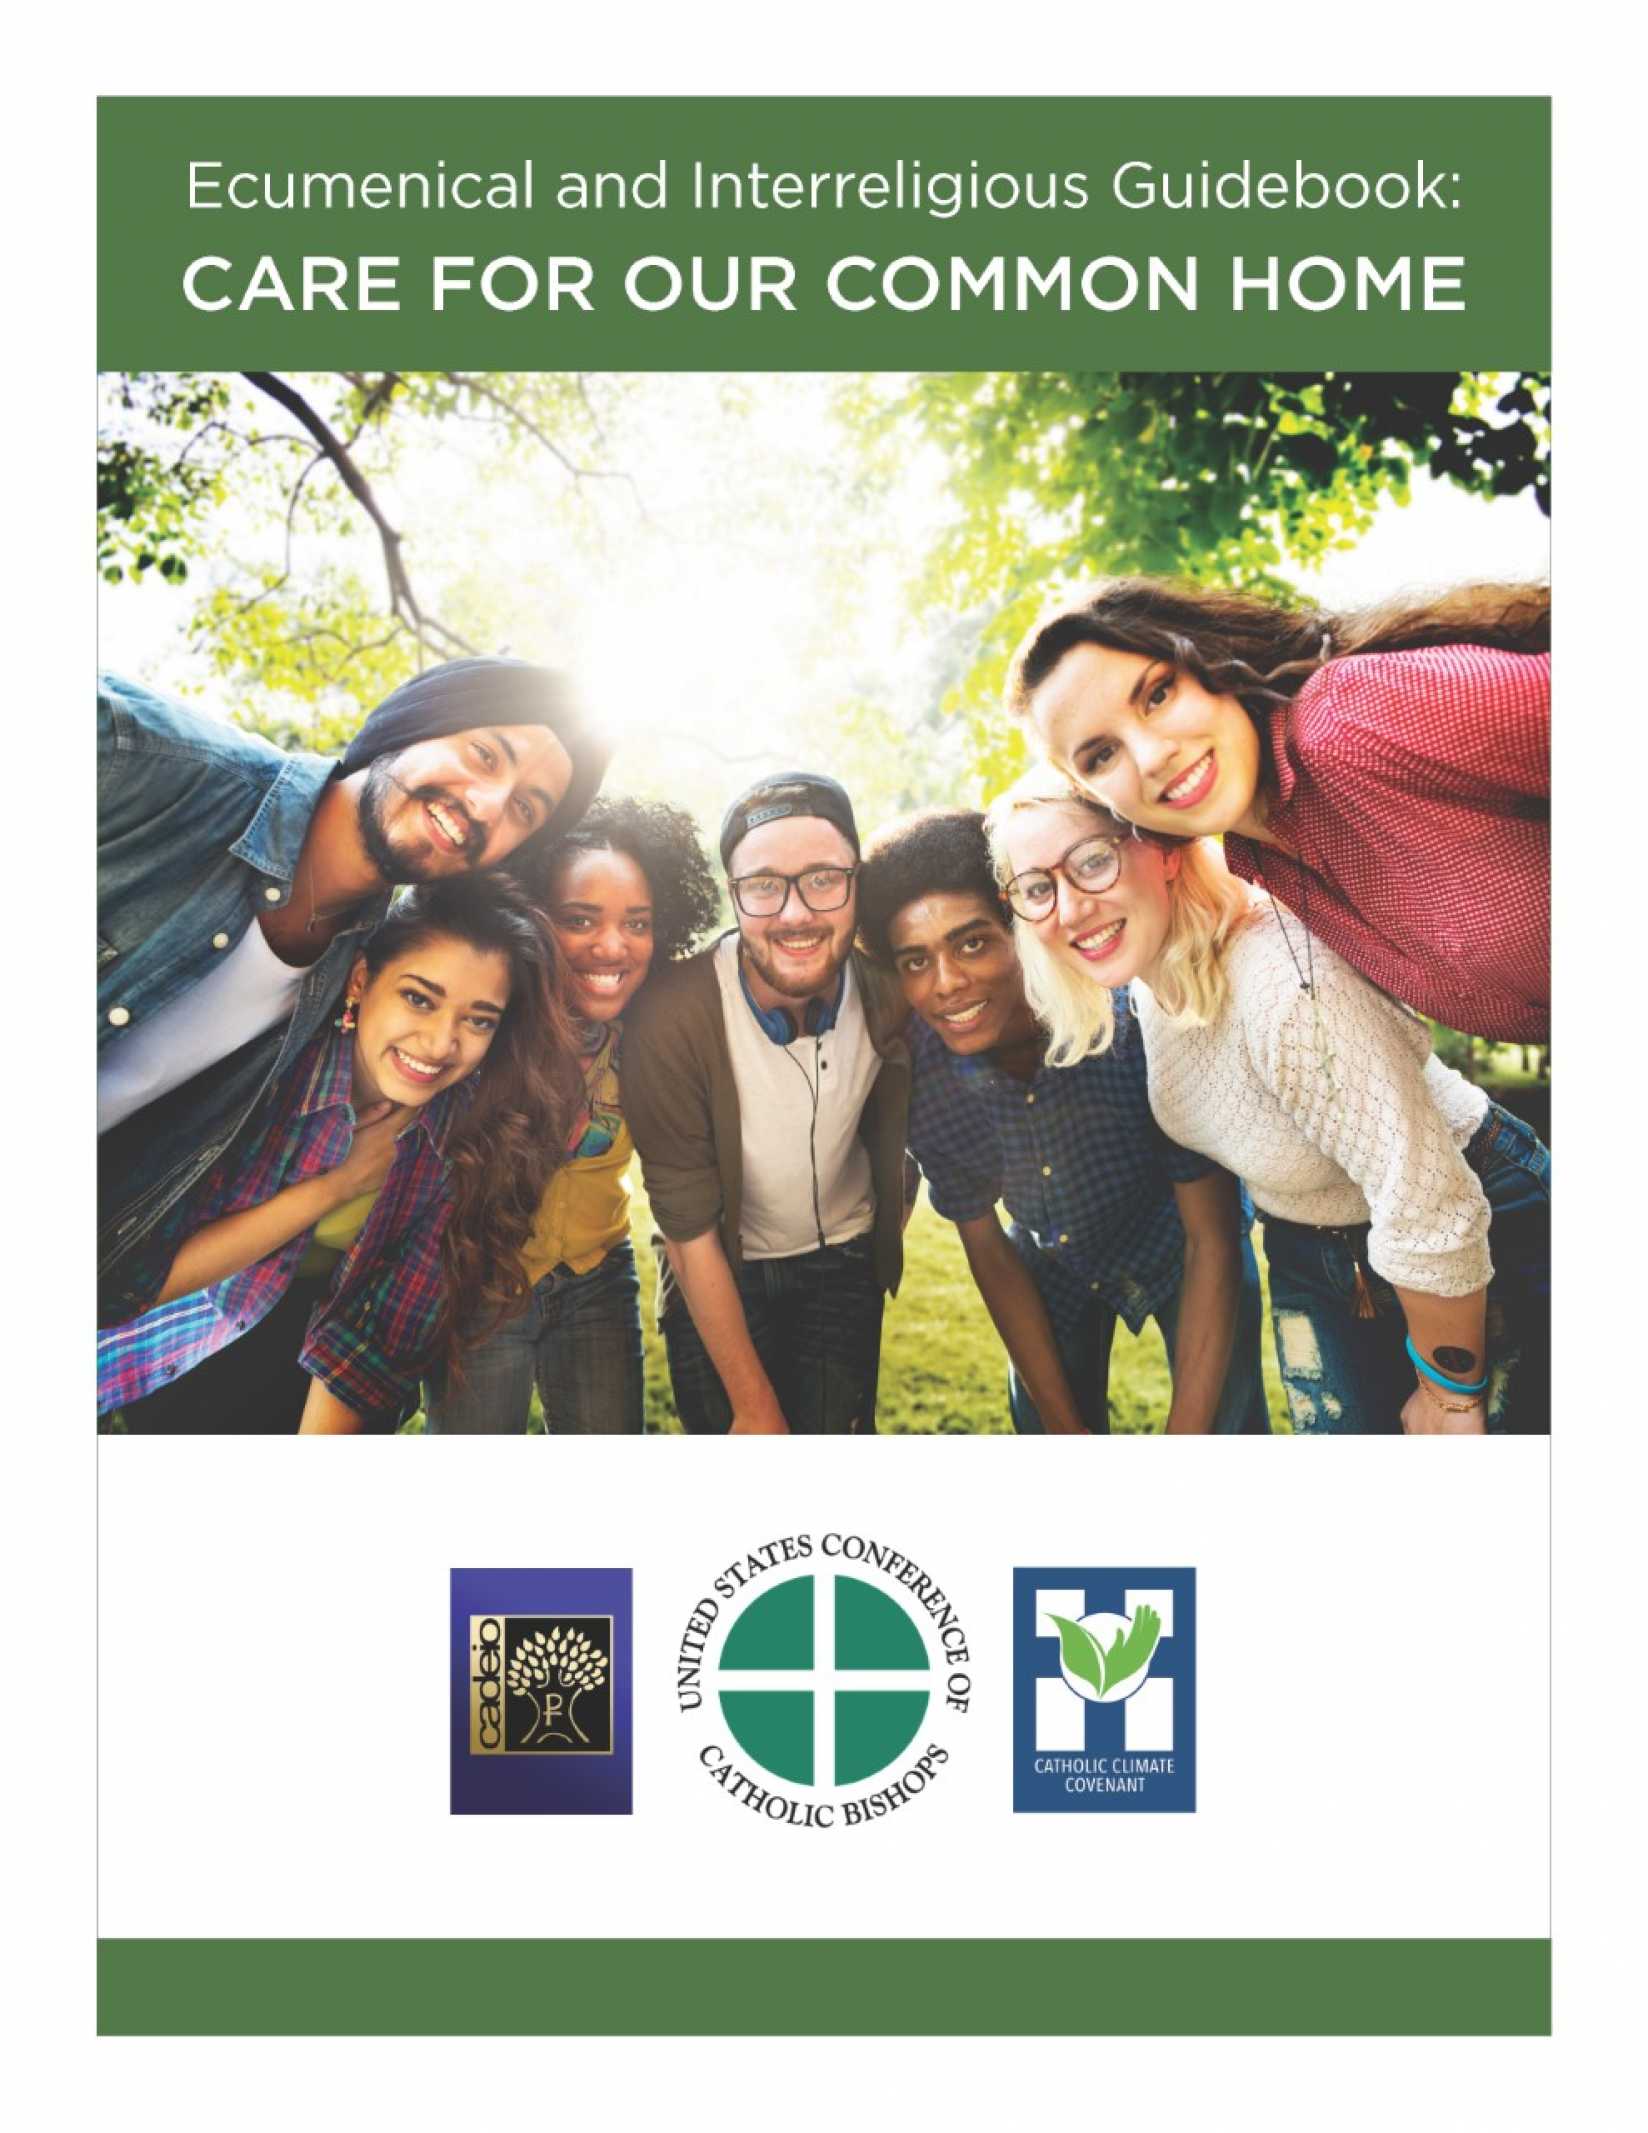 Online Dialogue in Celebration of the Ecumenical and Interreligious Guidebook: Care for Our Common Home